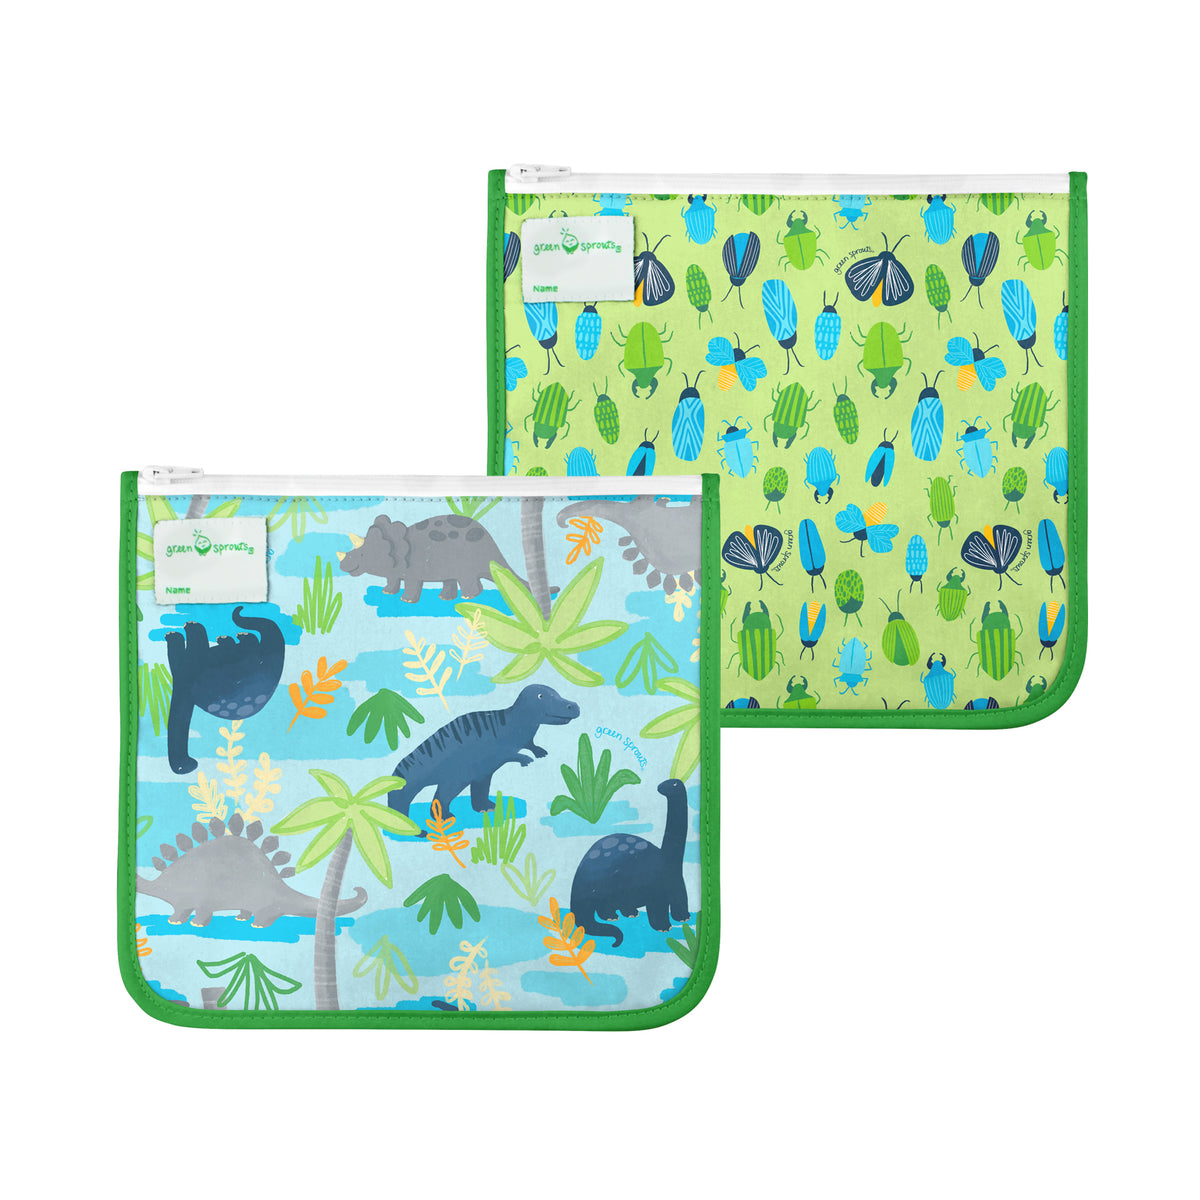 Green Sprouts Reusable Snack Bags (2 Pack) Aqua Rainbows/Pink Wildflowers Set